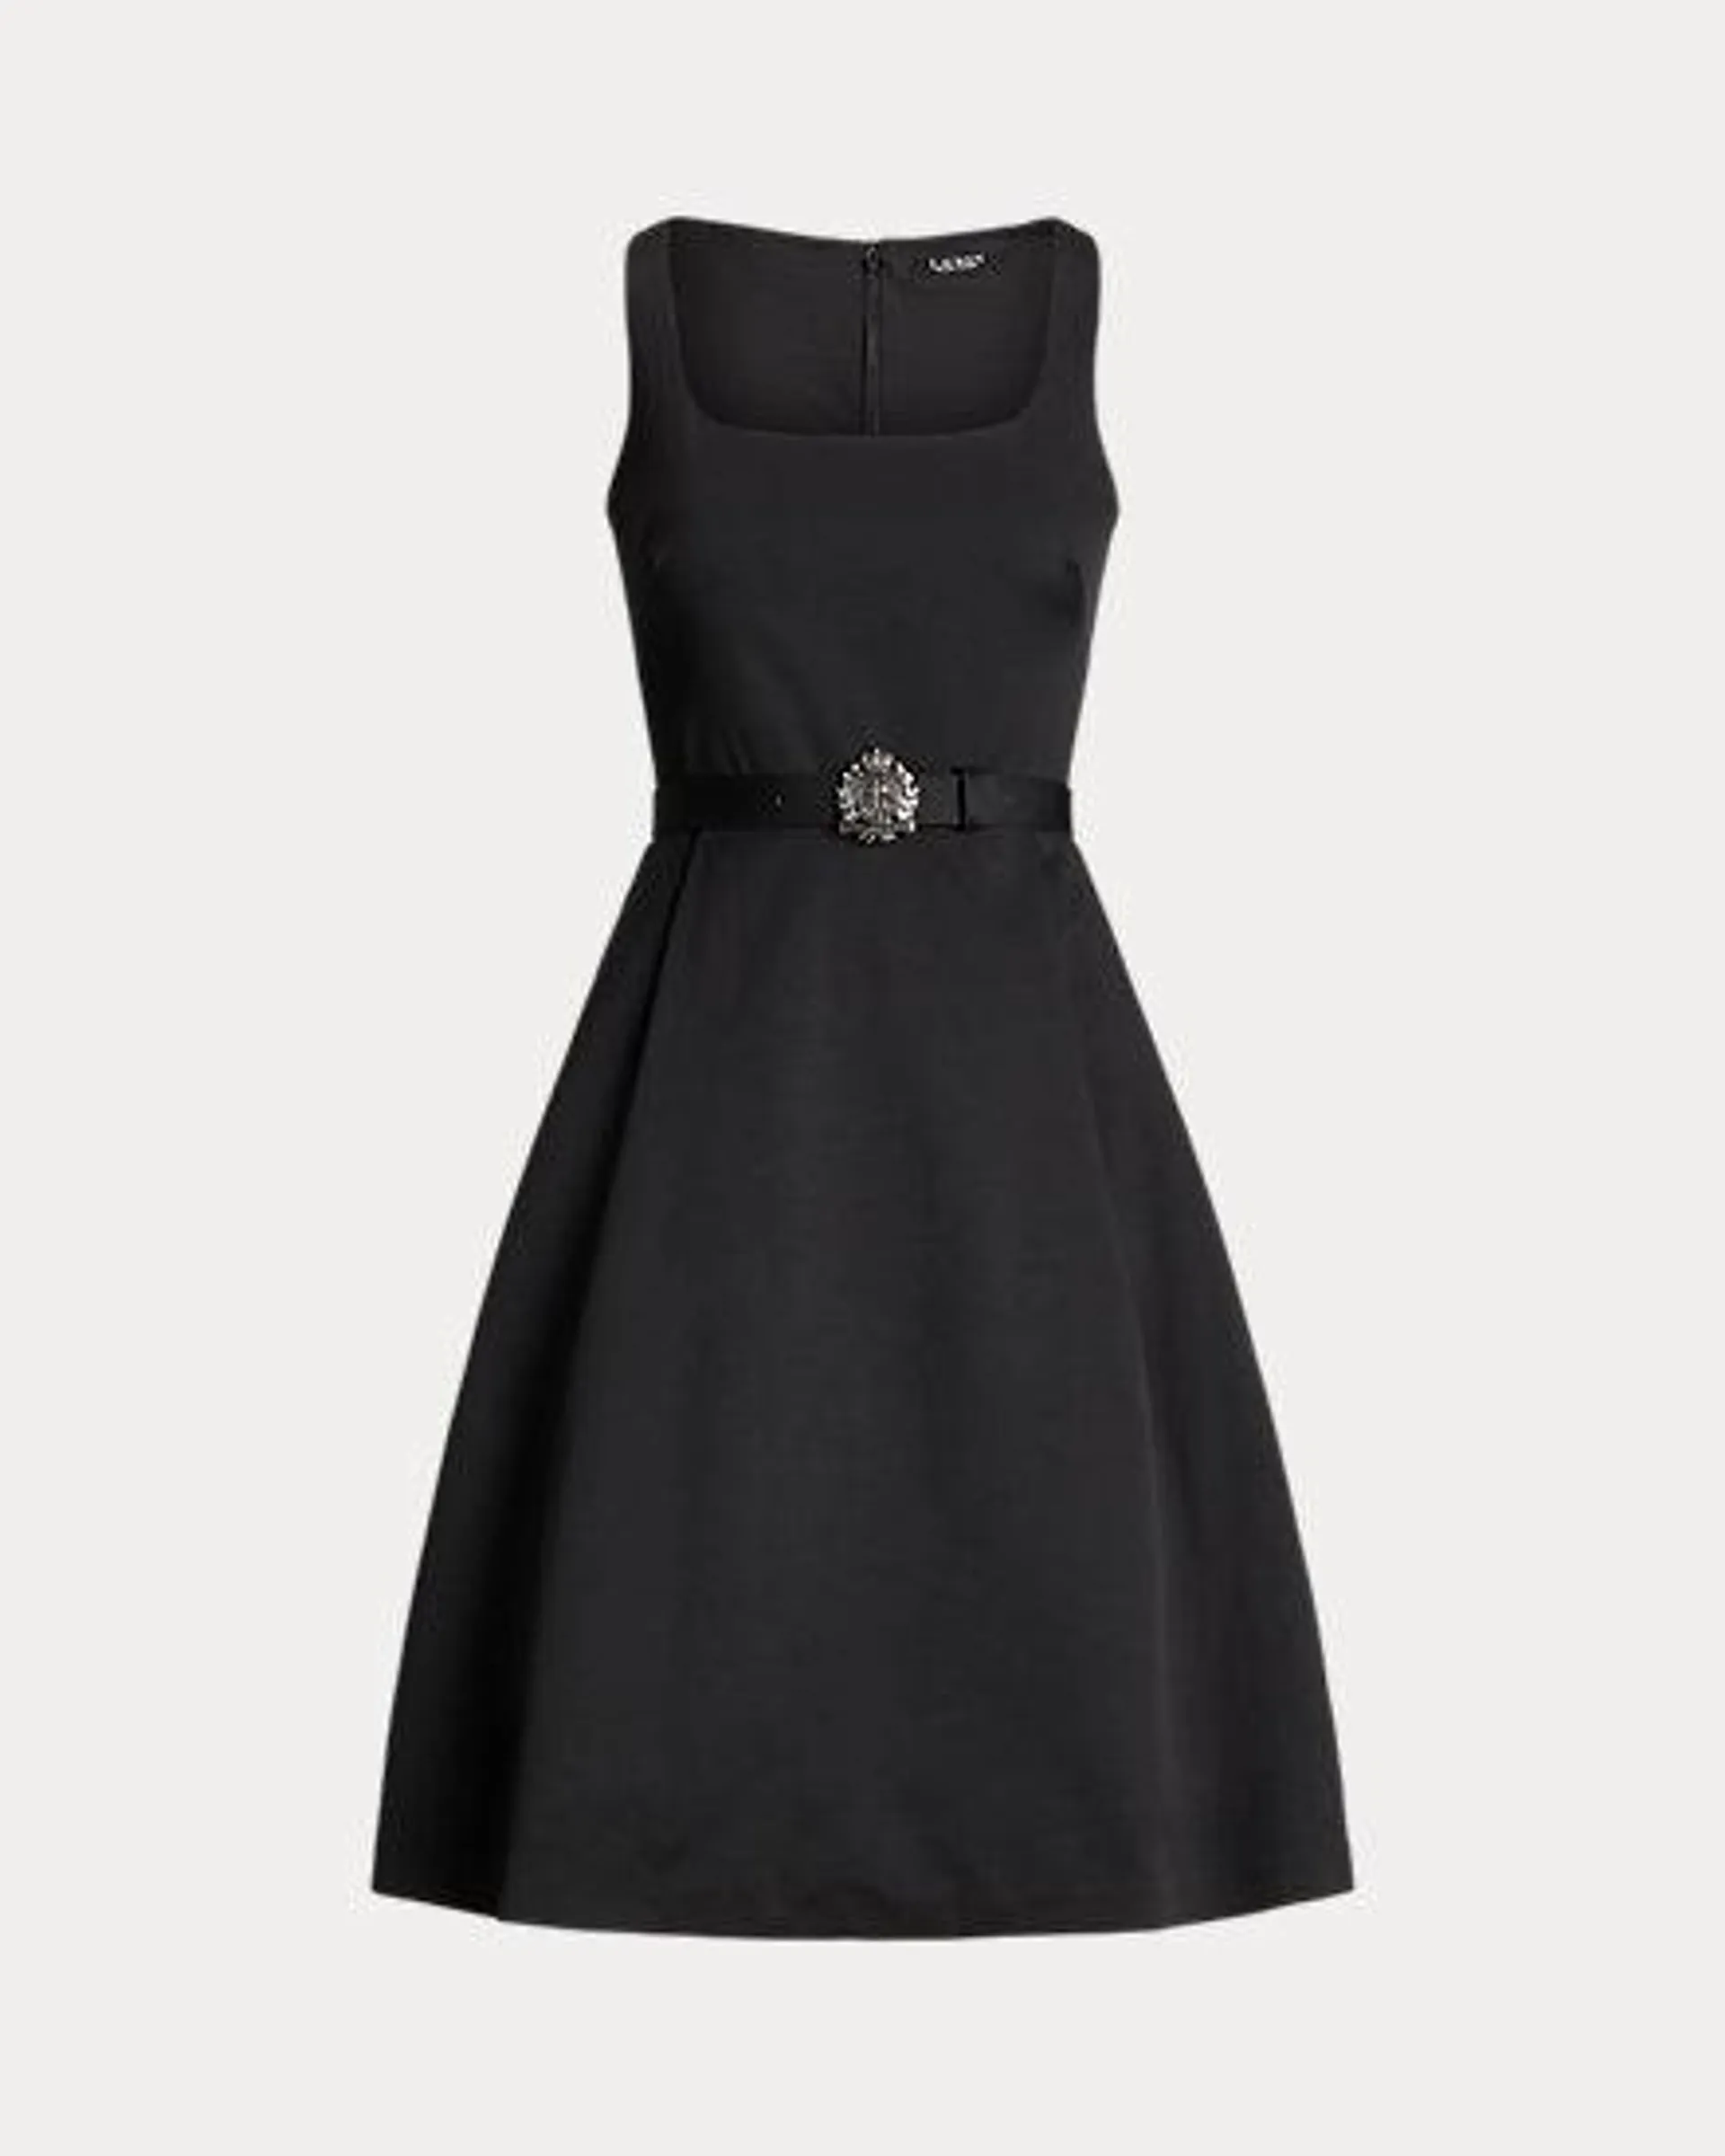 Belted Faille Cocktail Dress